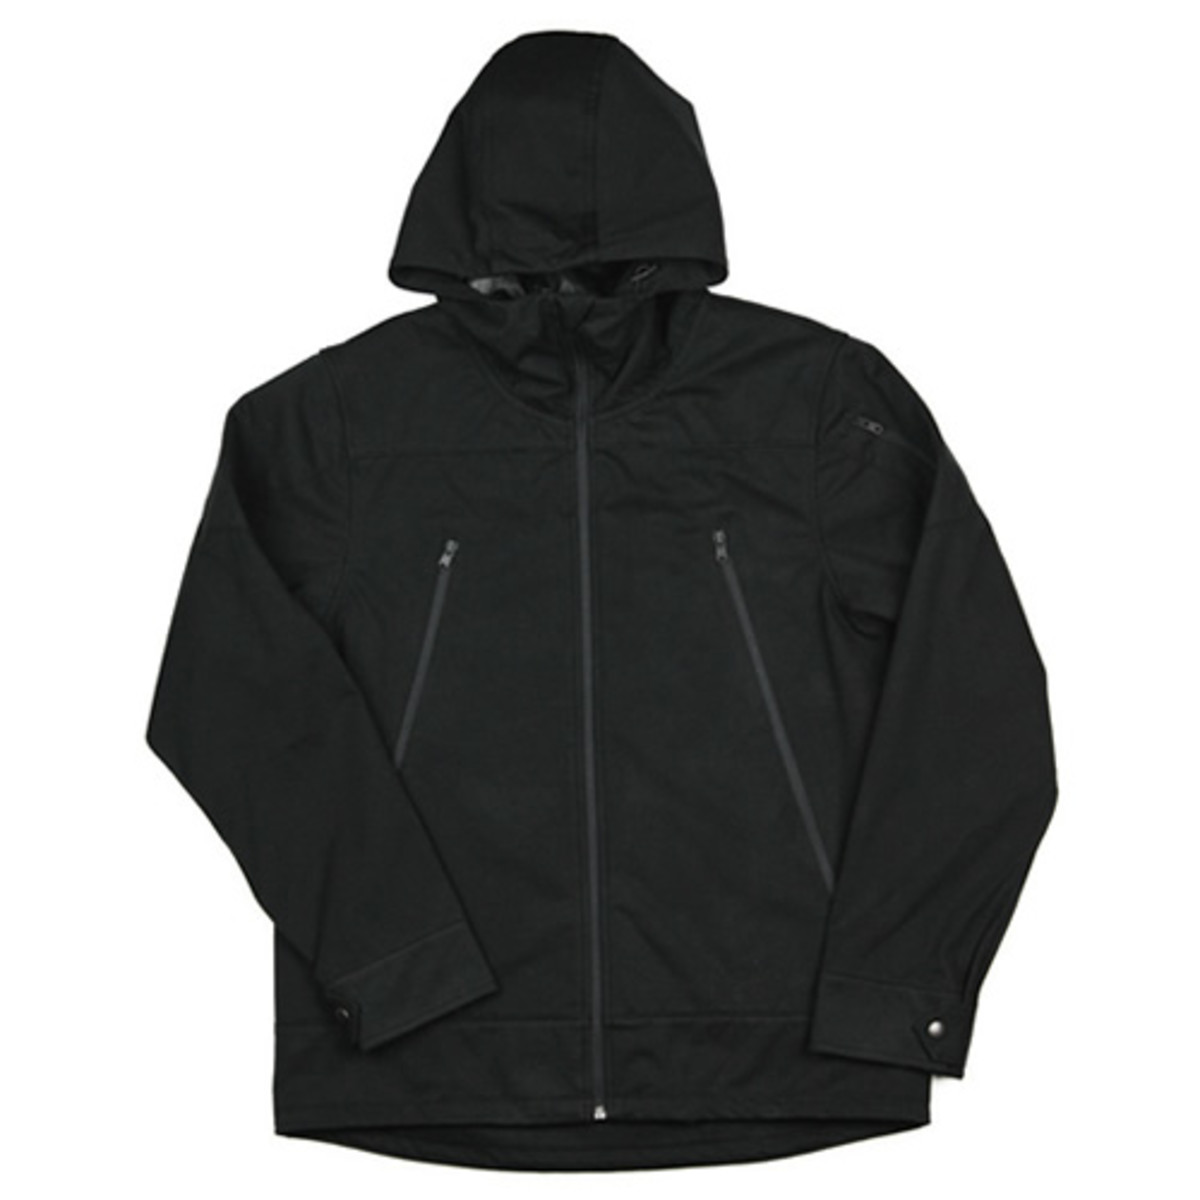 Gastown F.C. by Reigning Champ Fall '12 - Acquire